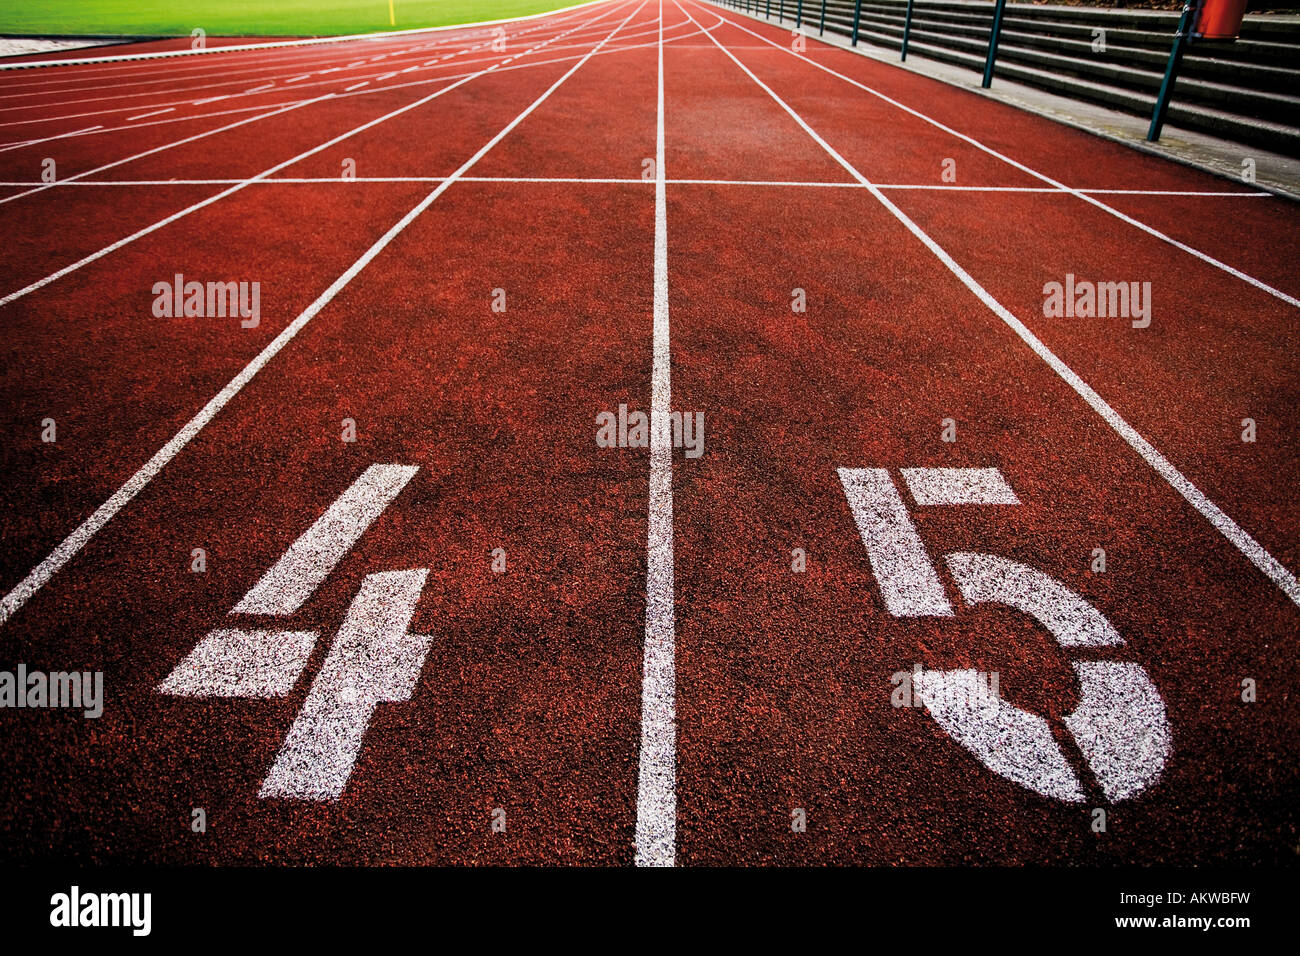 Painted '4' and '5' on running track Stock Photo